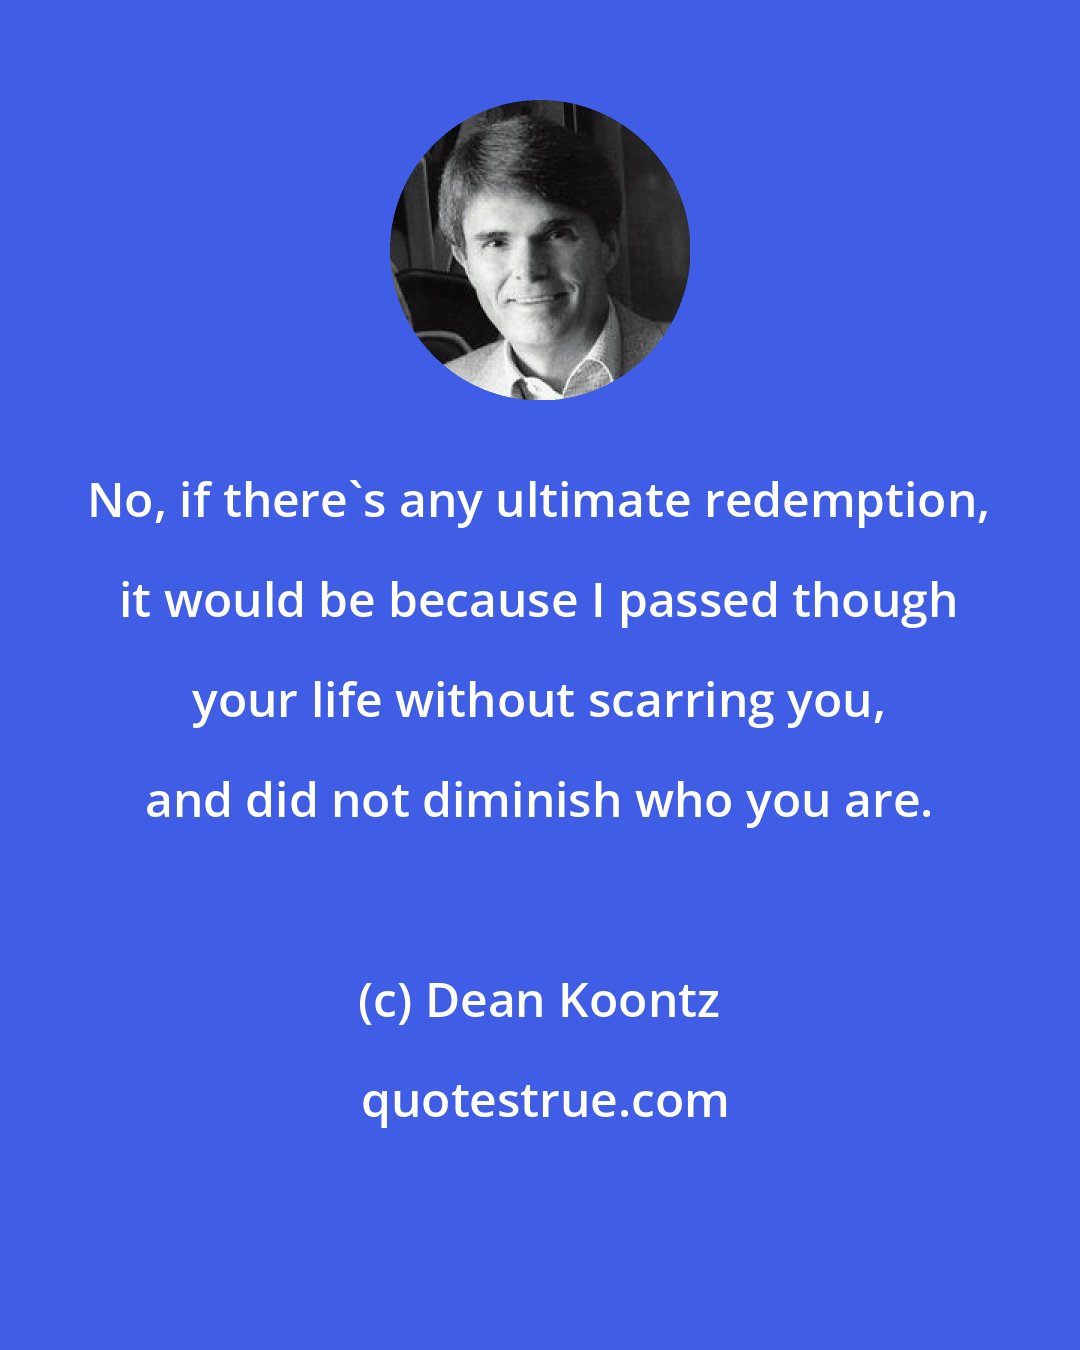 Dean Koontz: No, if there's any ultimate redemption, it would be because I passed though your life without scarring you, and did not diminish who you are.